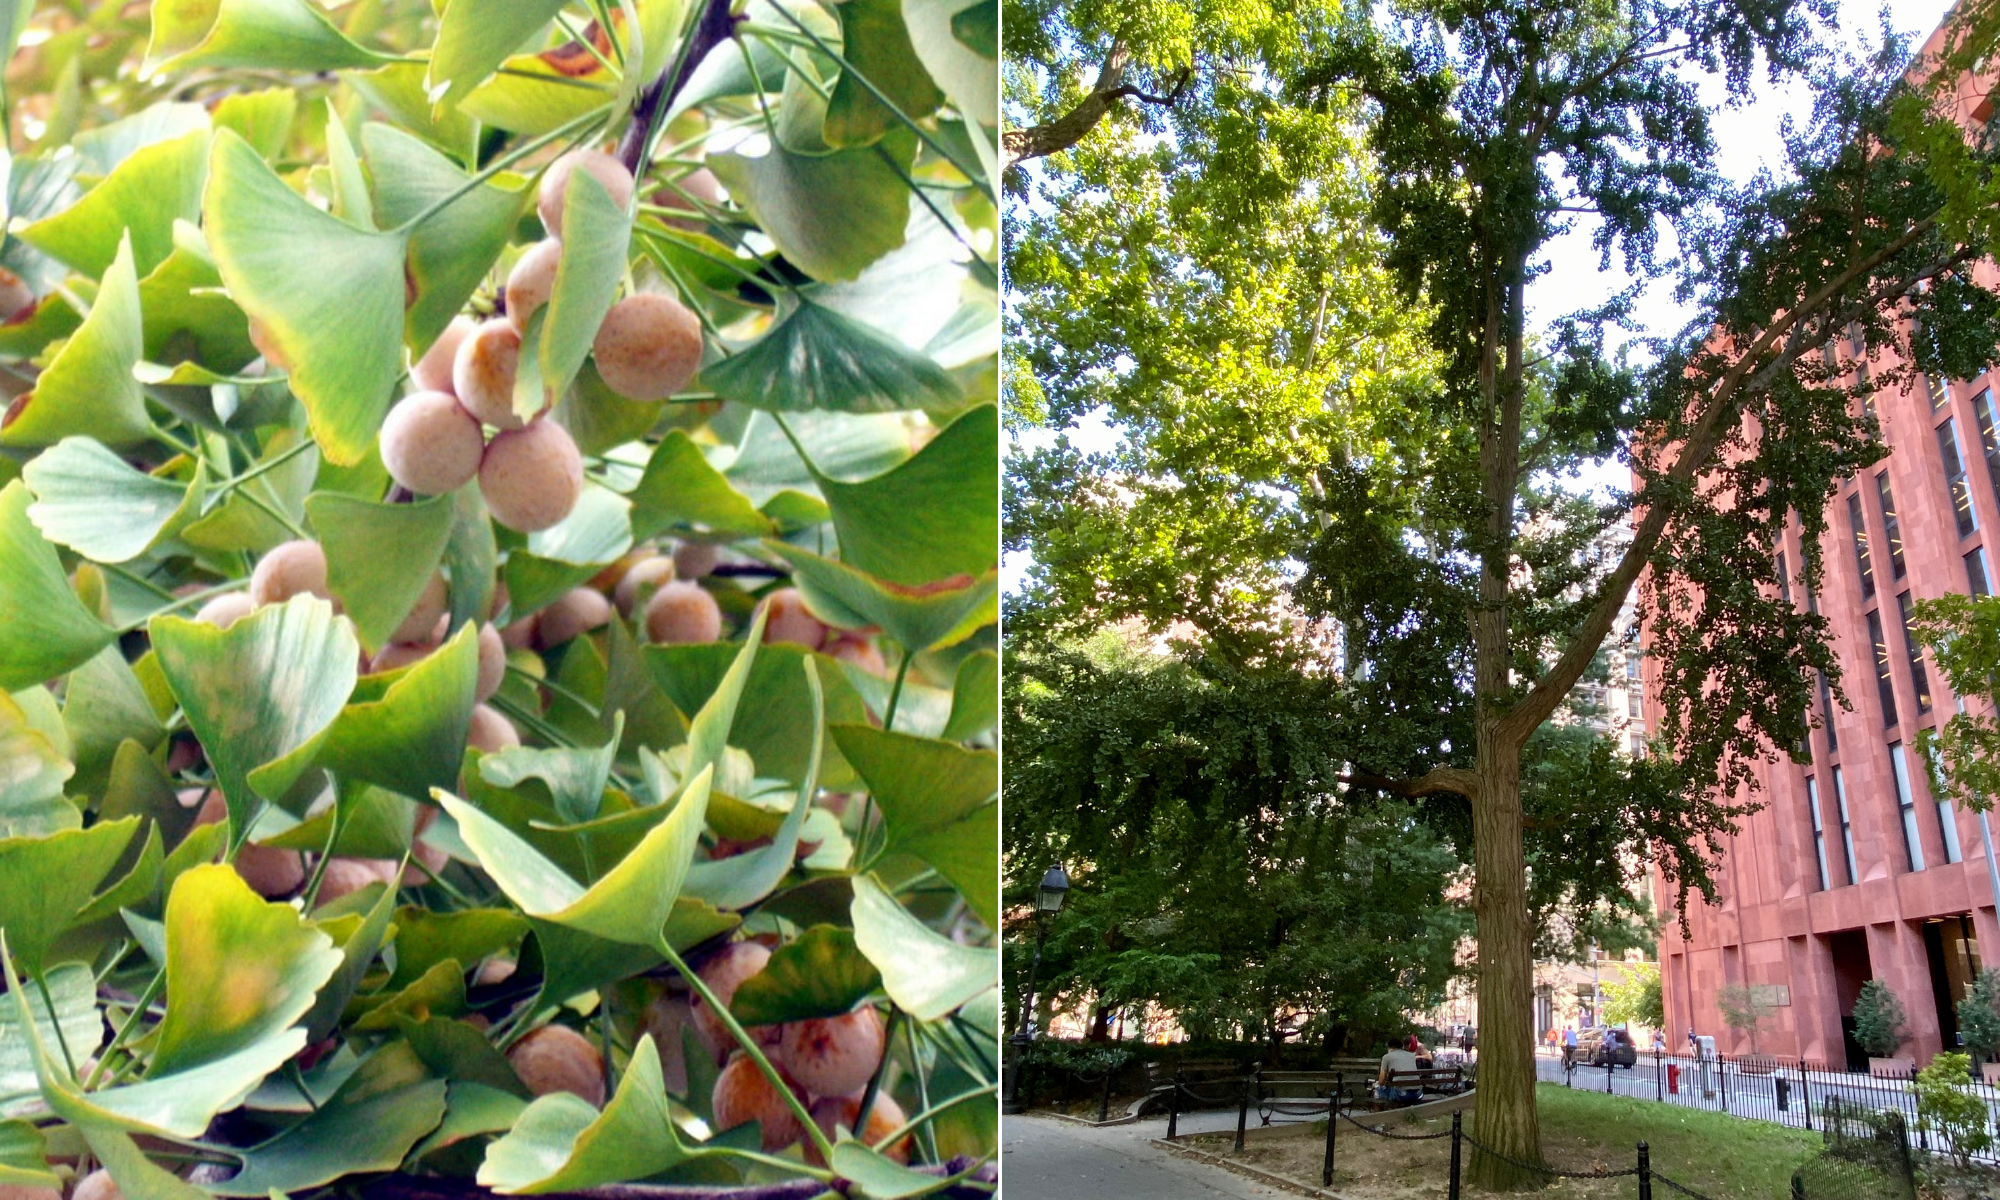 Ginkgo nuts are the seeds of stinky ginkgo fruit, and they are